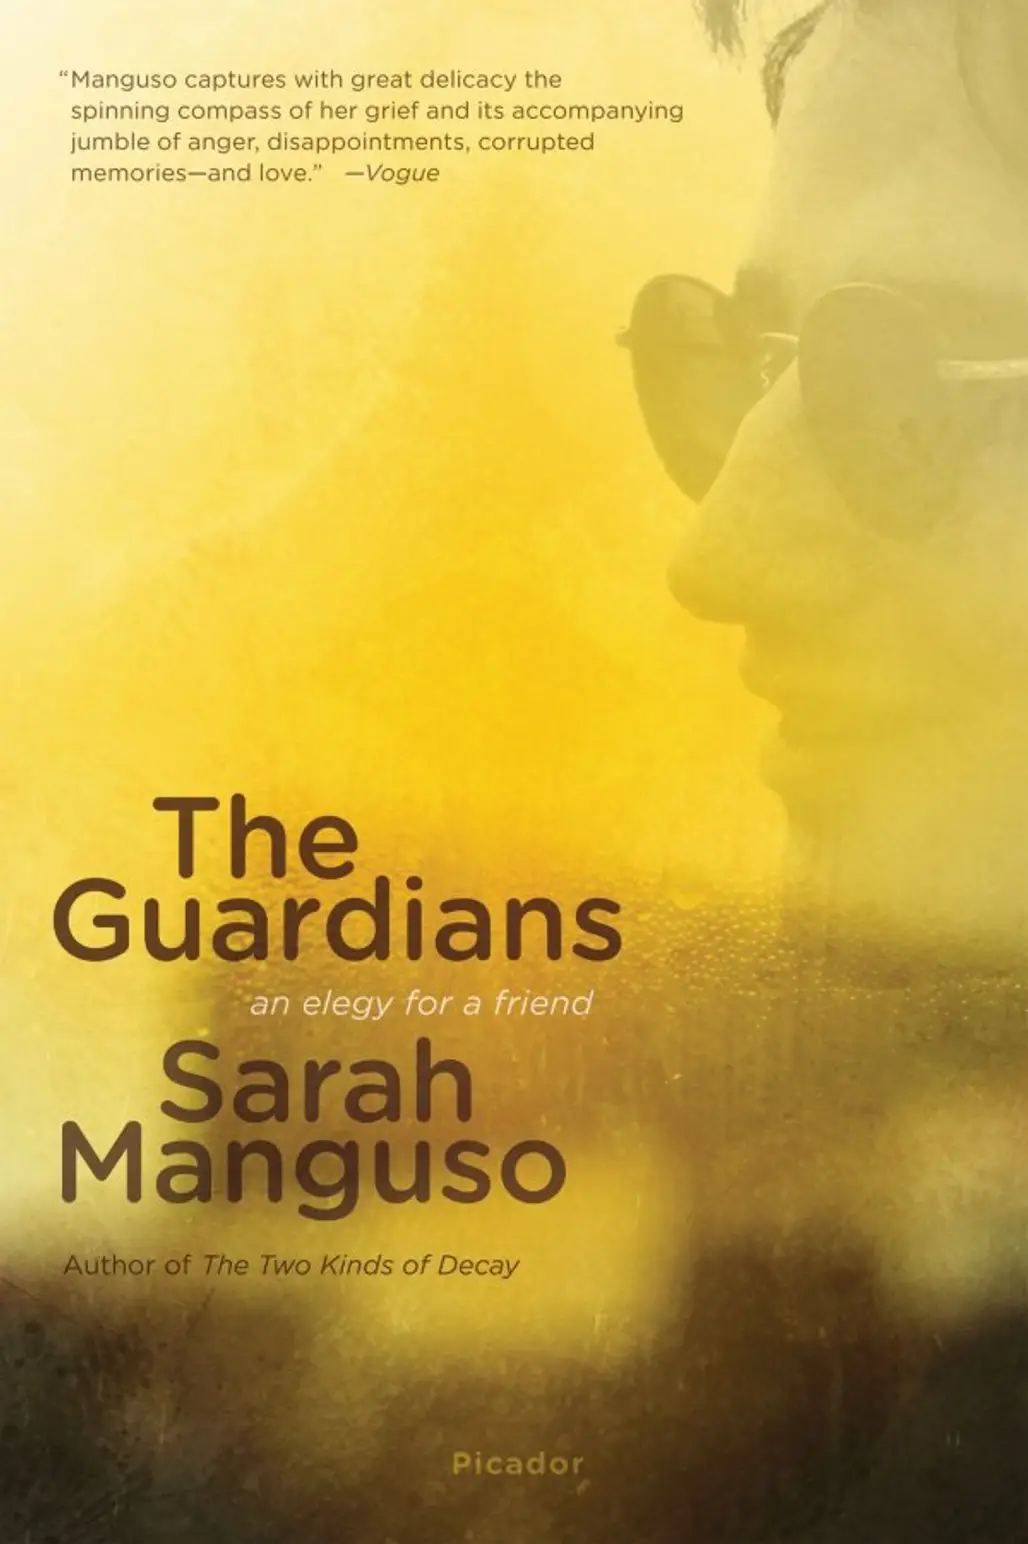 The Guardians: an Elegy for a Friend by Sarah Manguso